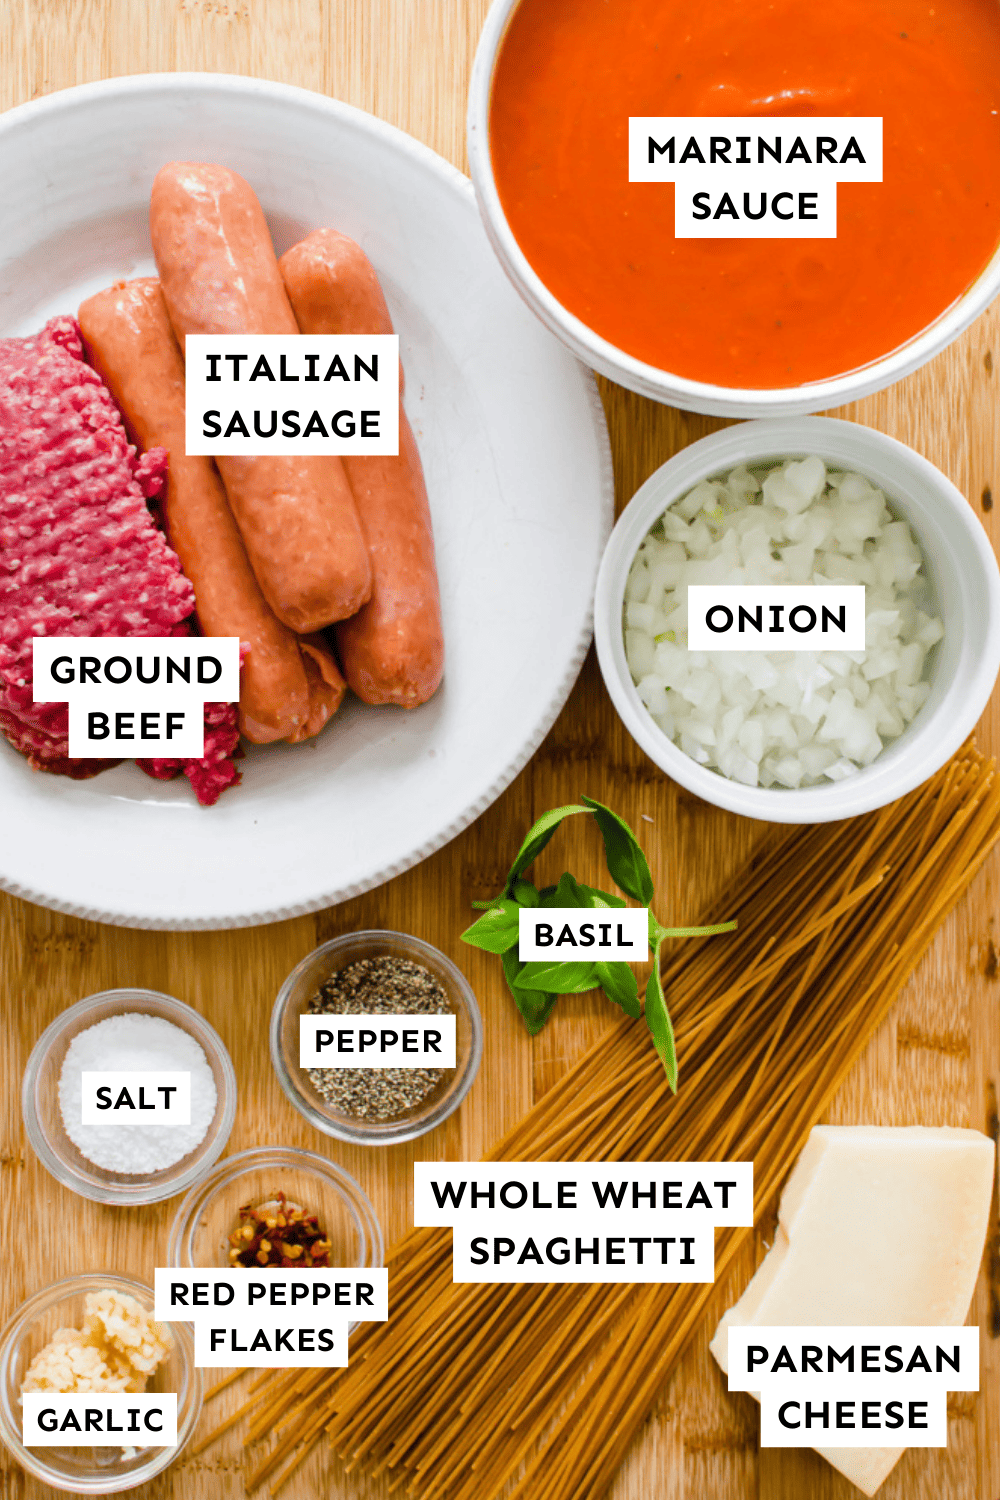 Ingredients for meaty marinara sauce measured out and labeled.